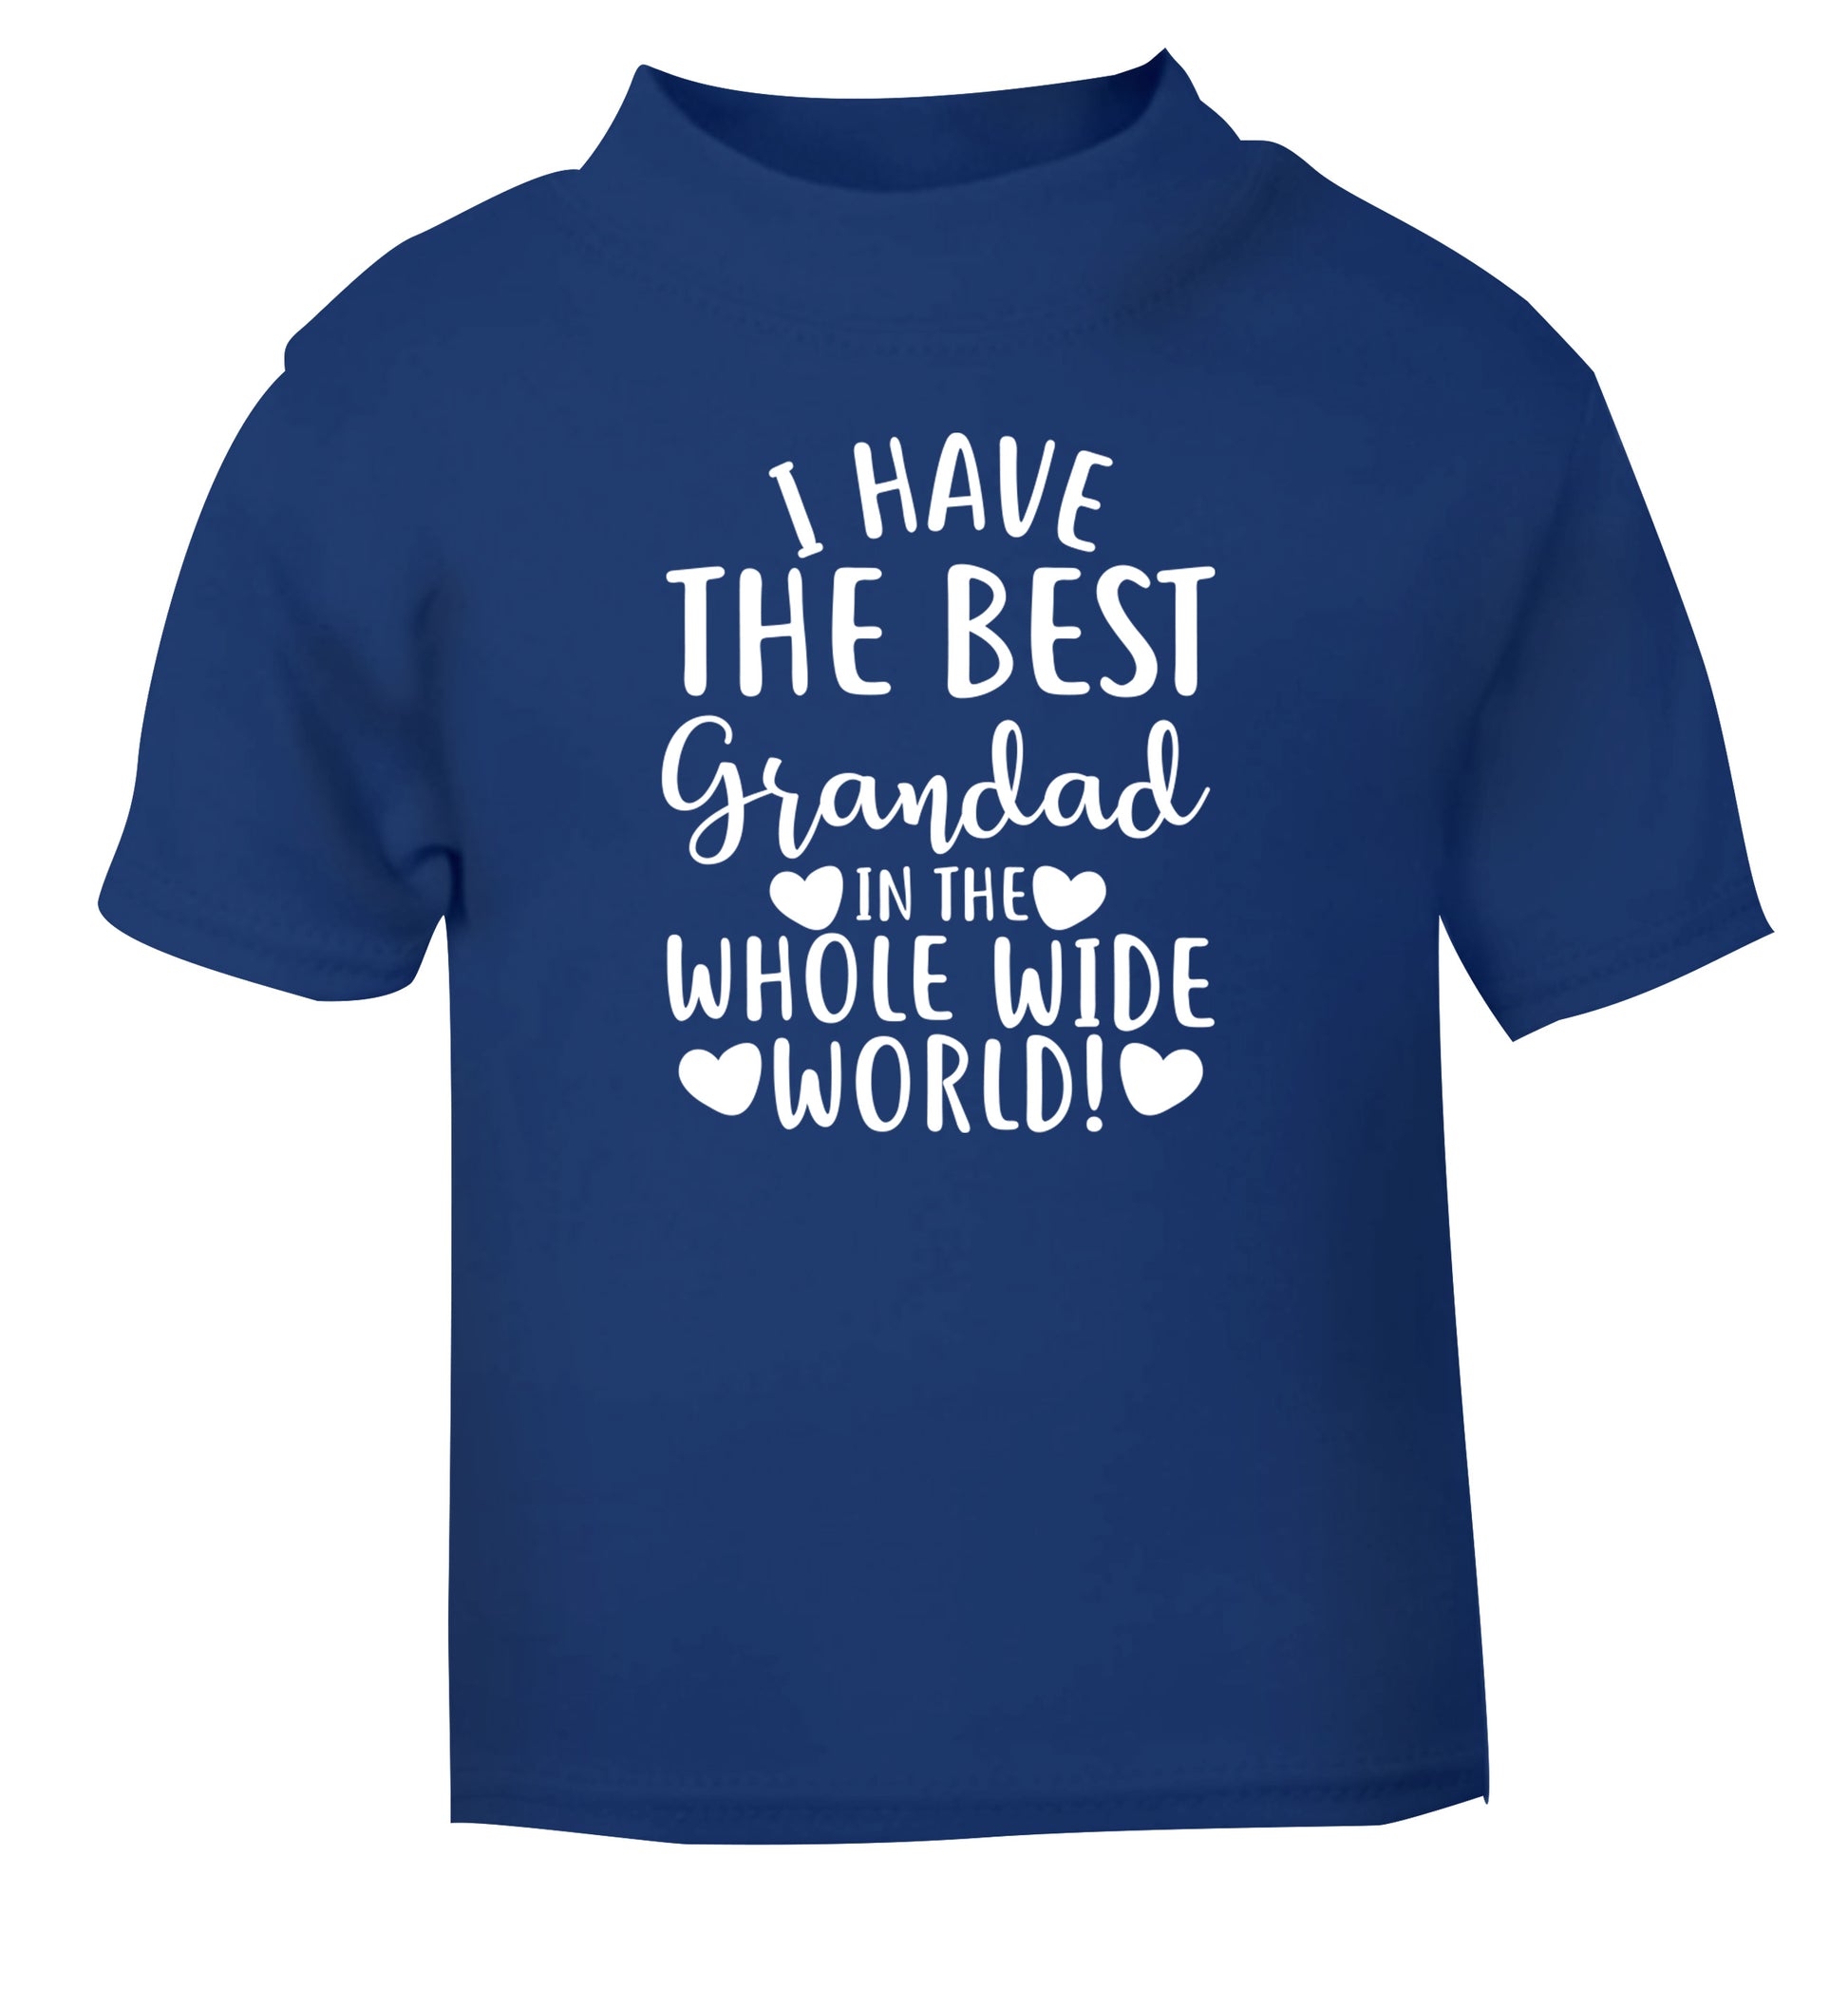 I have the best grandad in the whole wide world! blue Baby Toddler Tshirt 2 Years